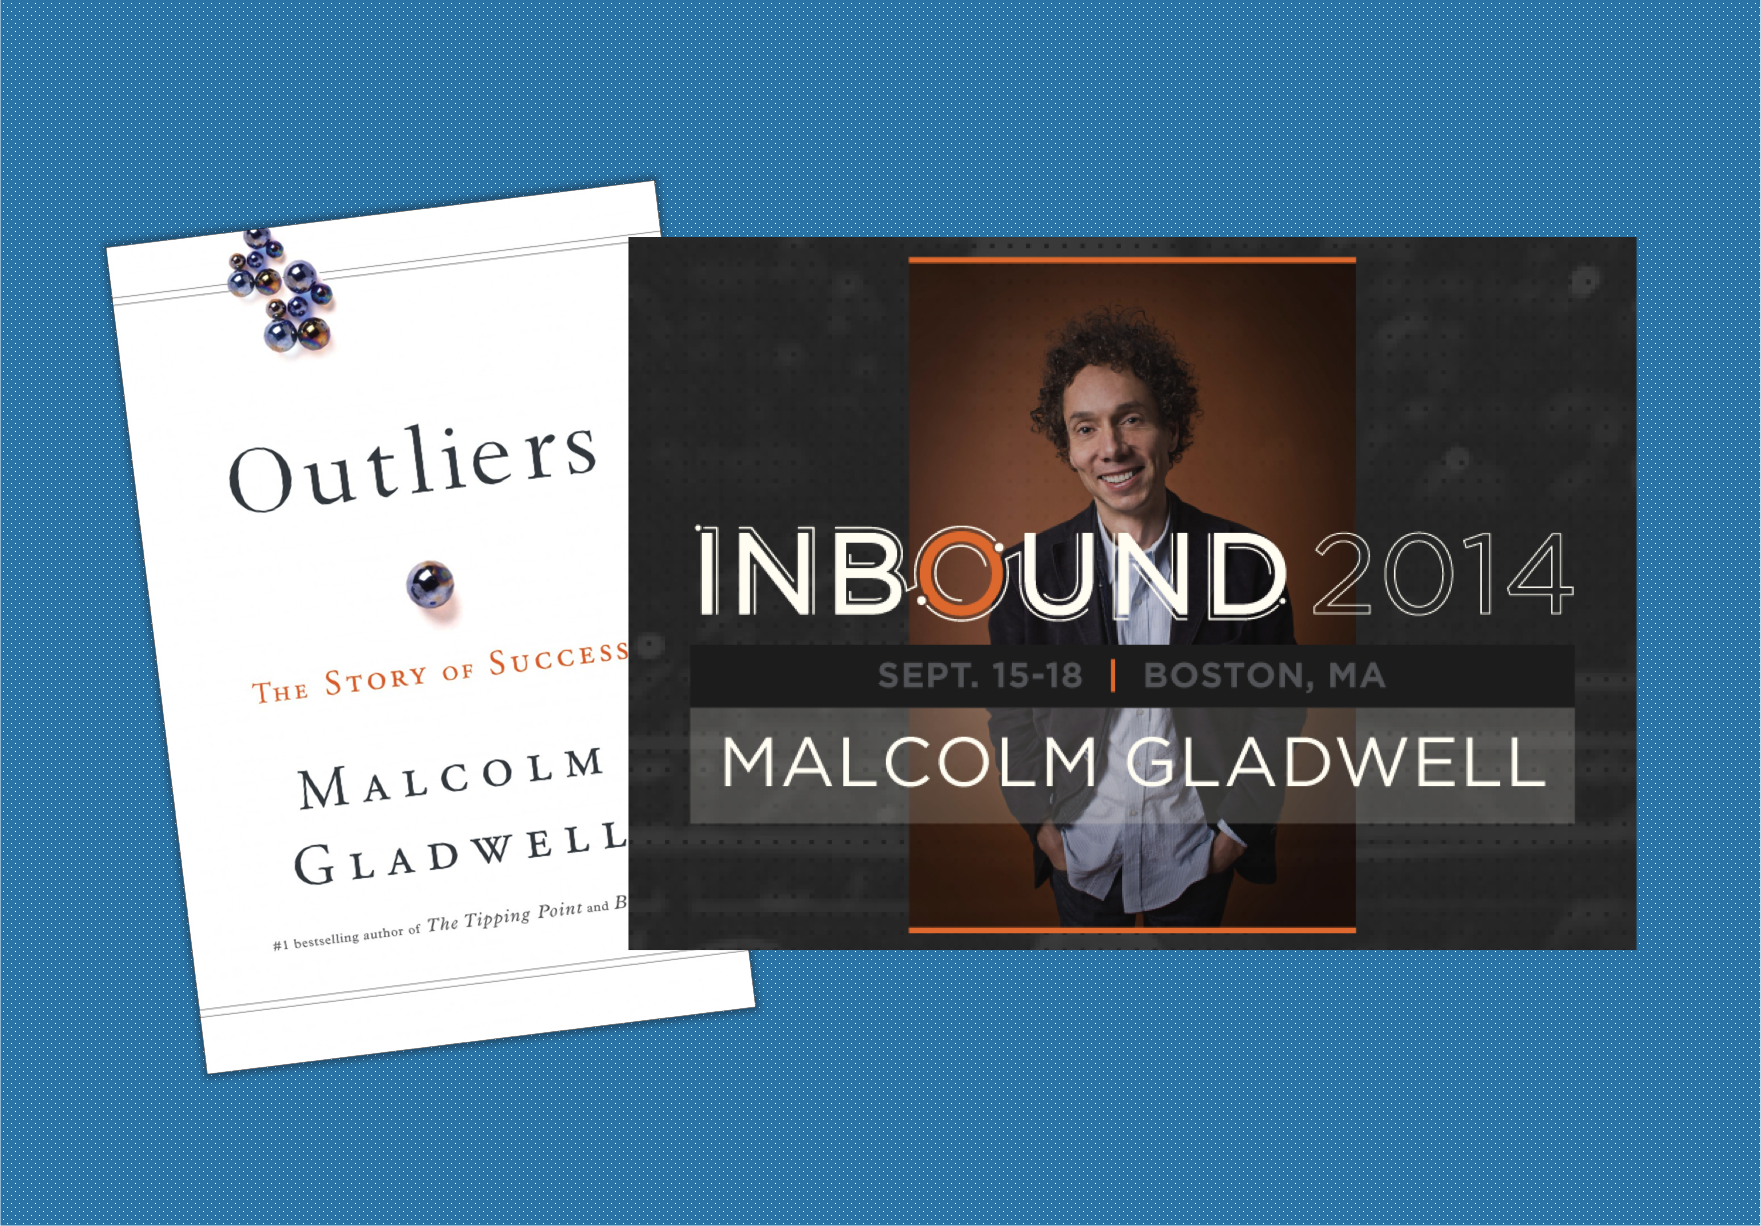 the story of success by malcolm gladwell